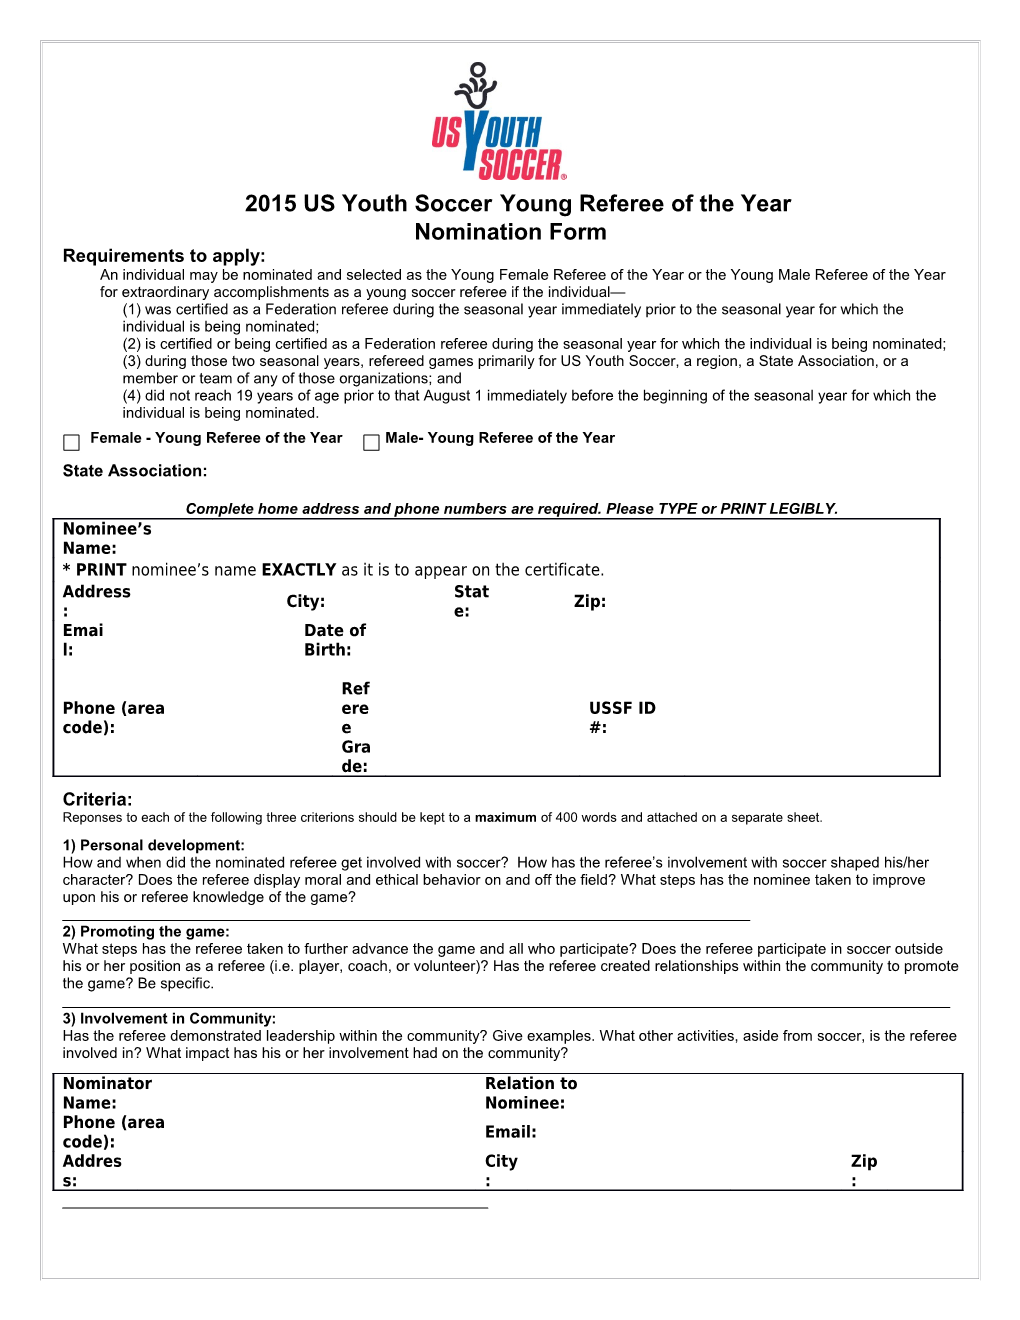 2015 US Youth Socceryoung Referee of the Year